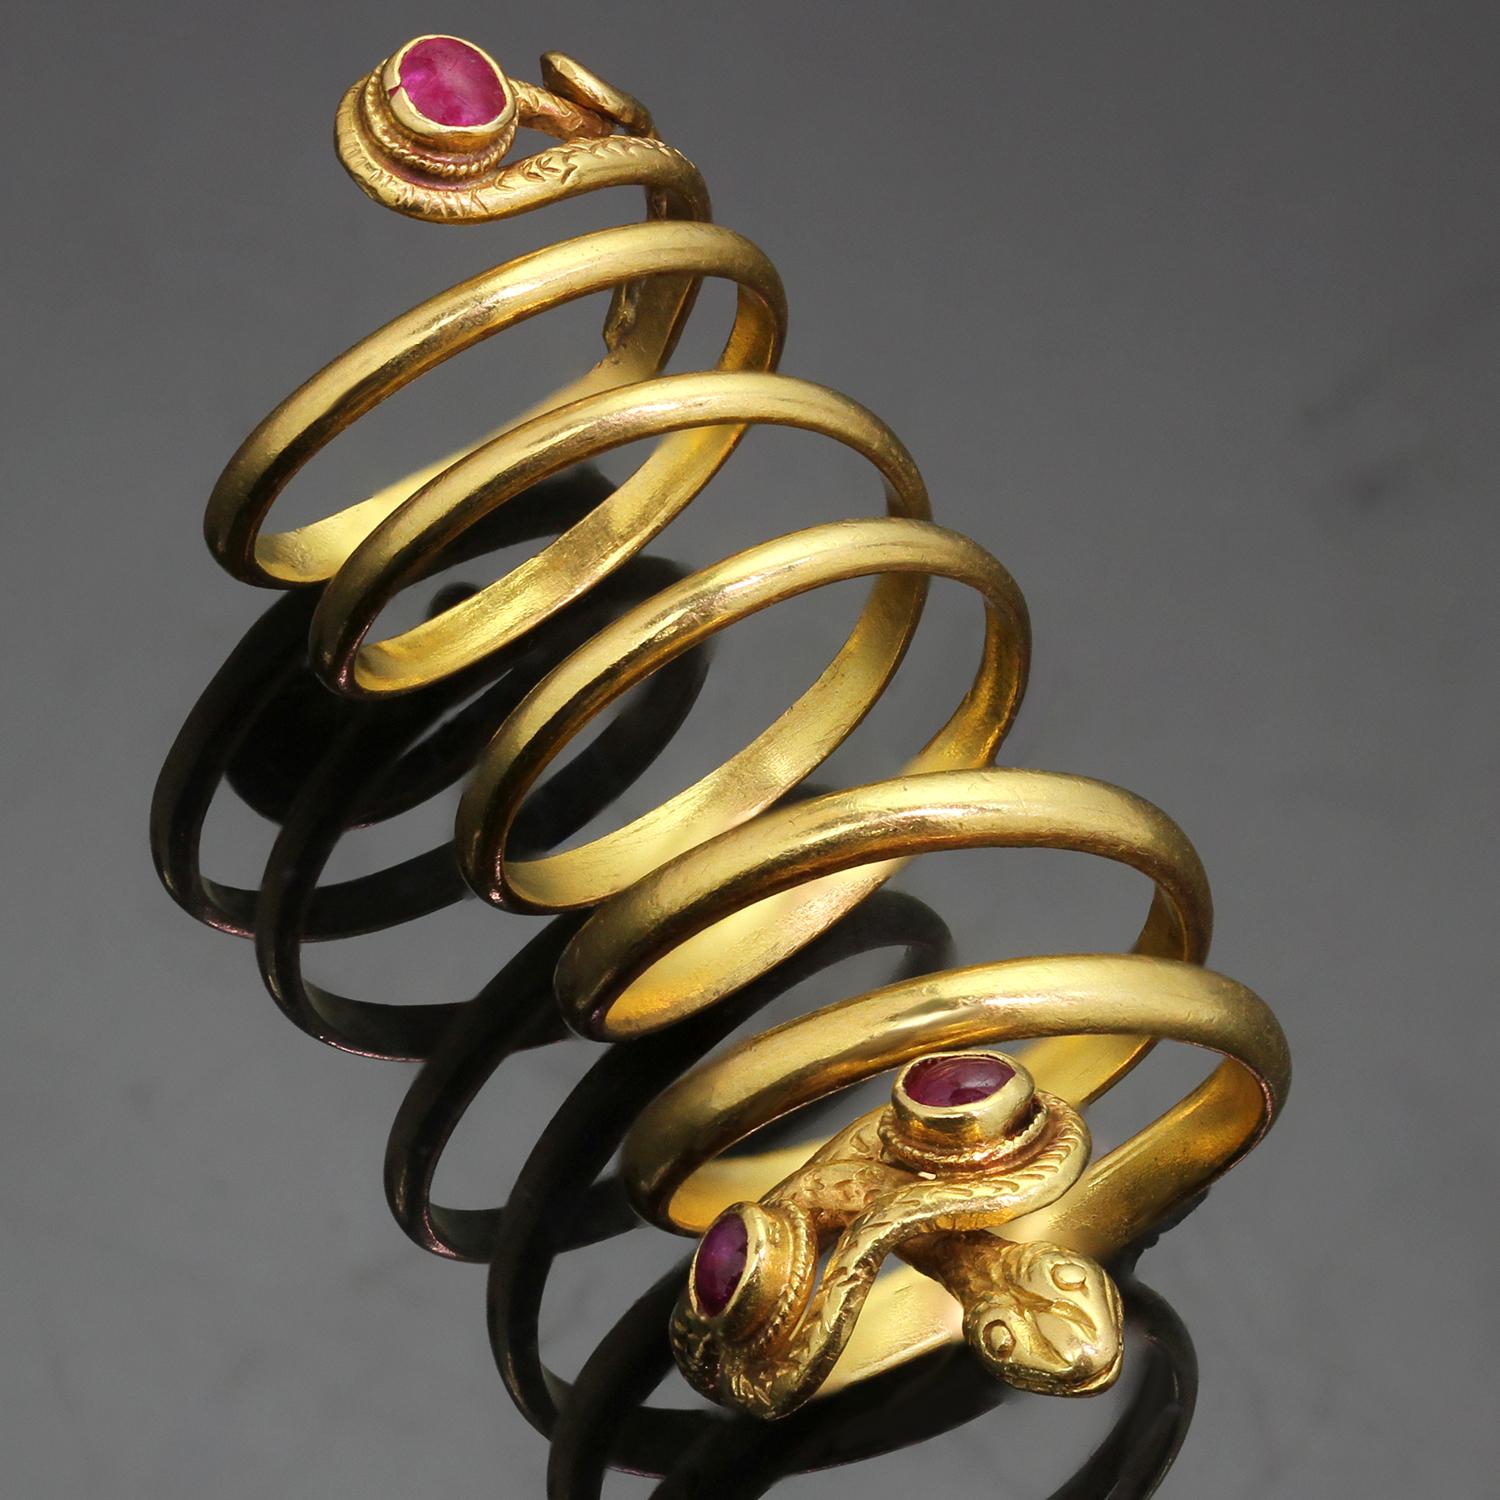 This gorgeous vintage Zolotas ring in style of Archaeological Revival features a timeless coiled snake design intricately crafted in 22k yellow gold and bezel-set with a pair of cabochon rubies. Made in Greece.  Measurements: 0.70